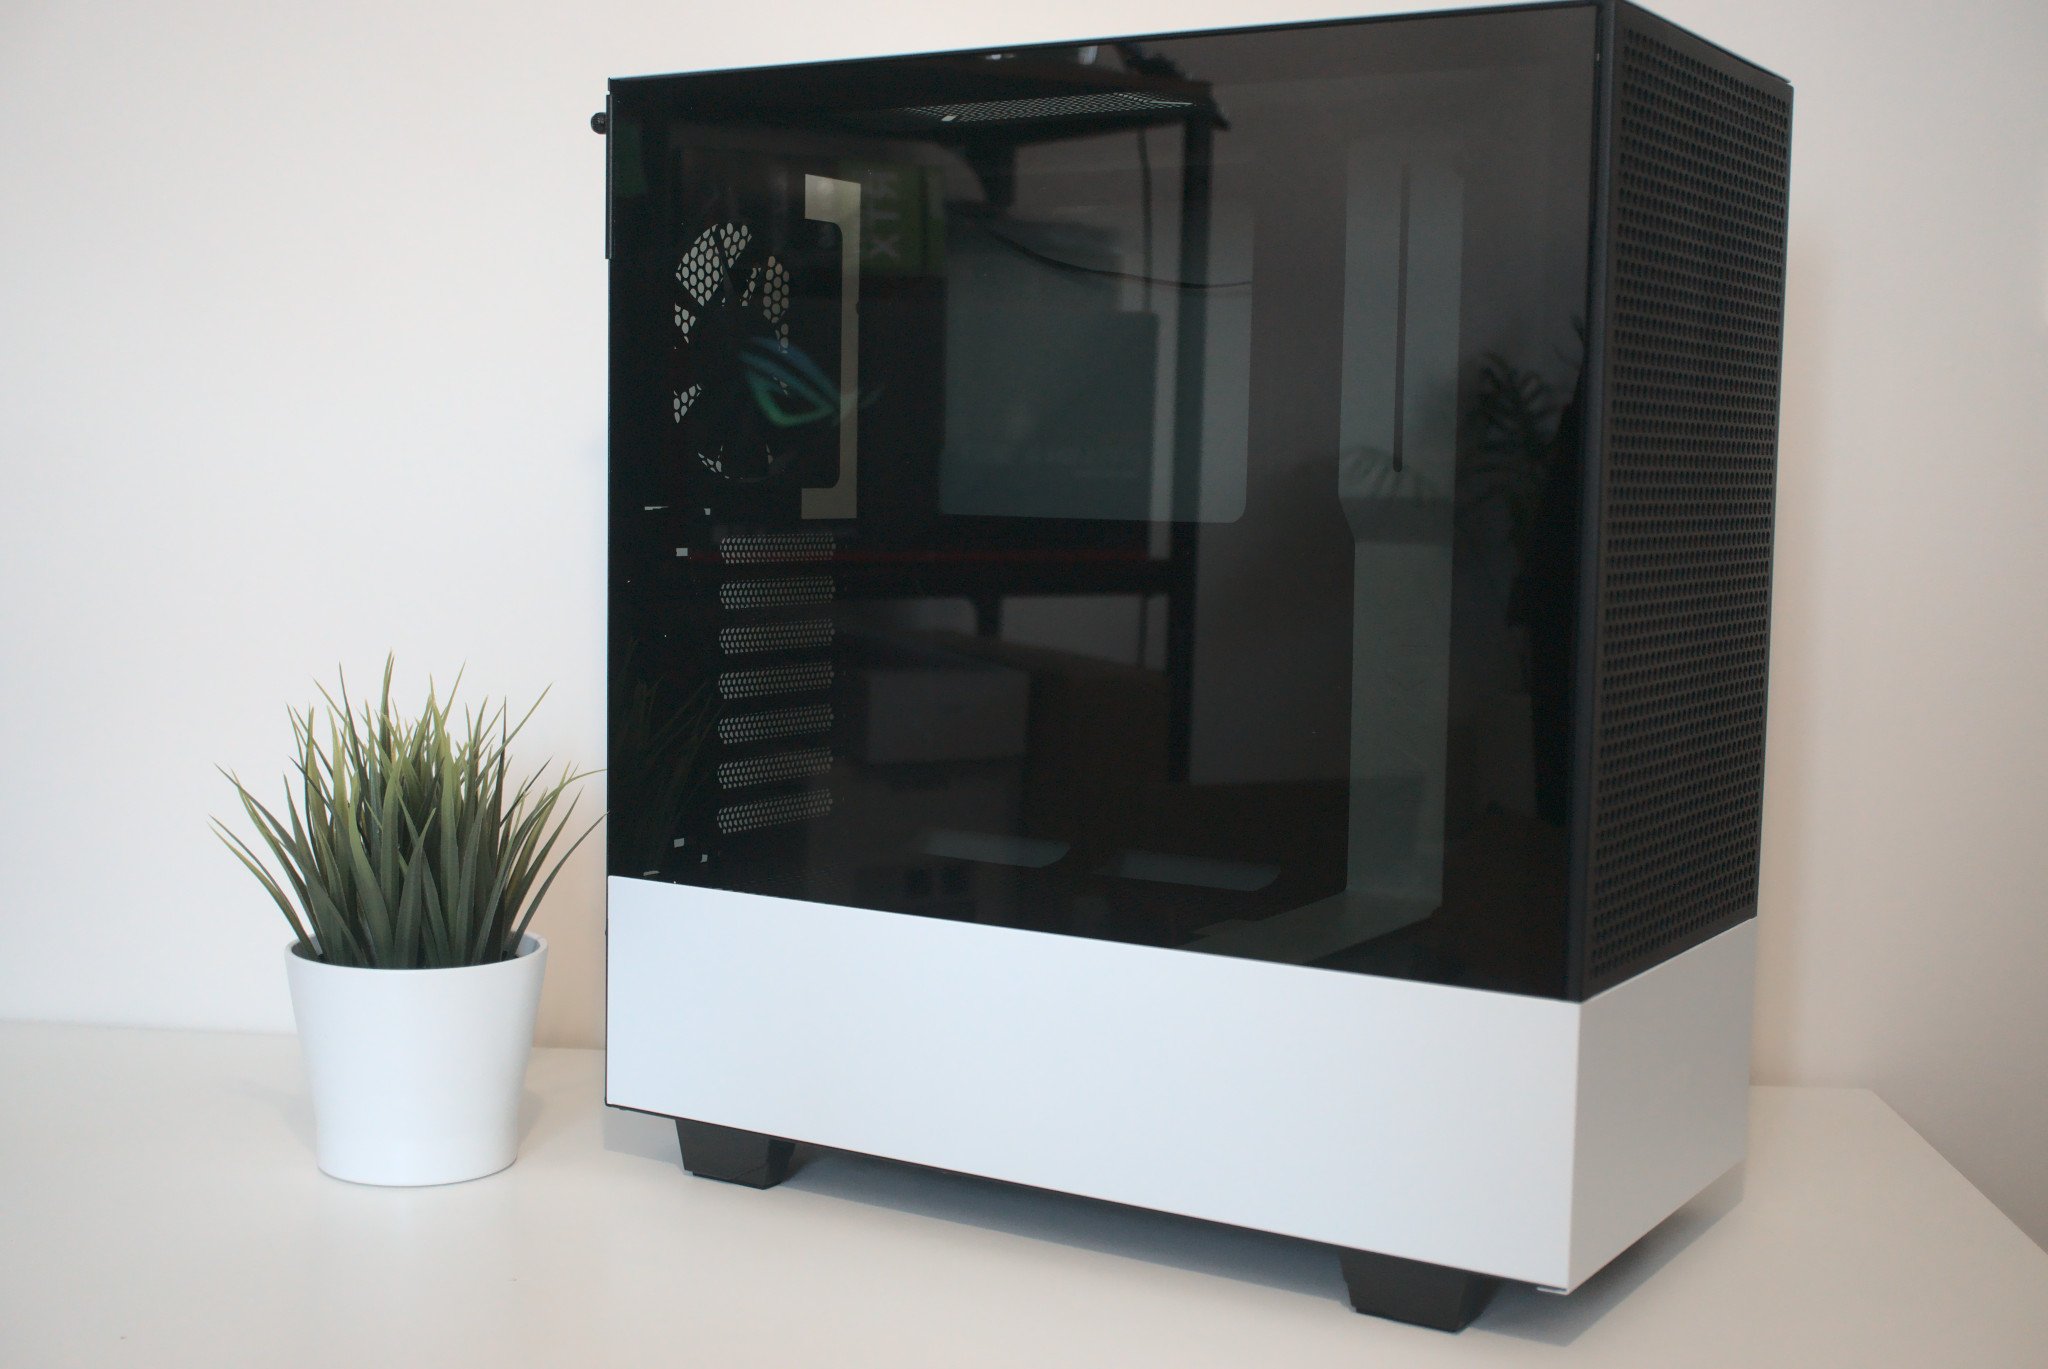 NZXT H510 Flow review: NZXT has almost perfected the H510 PC case